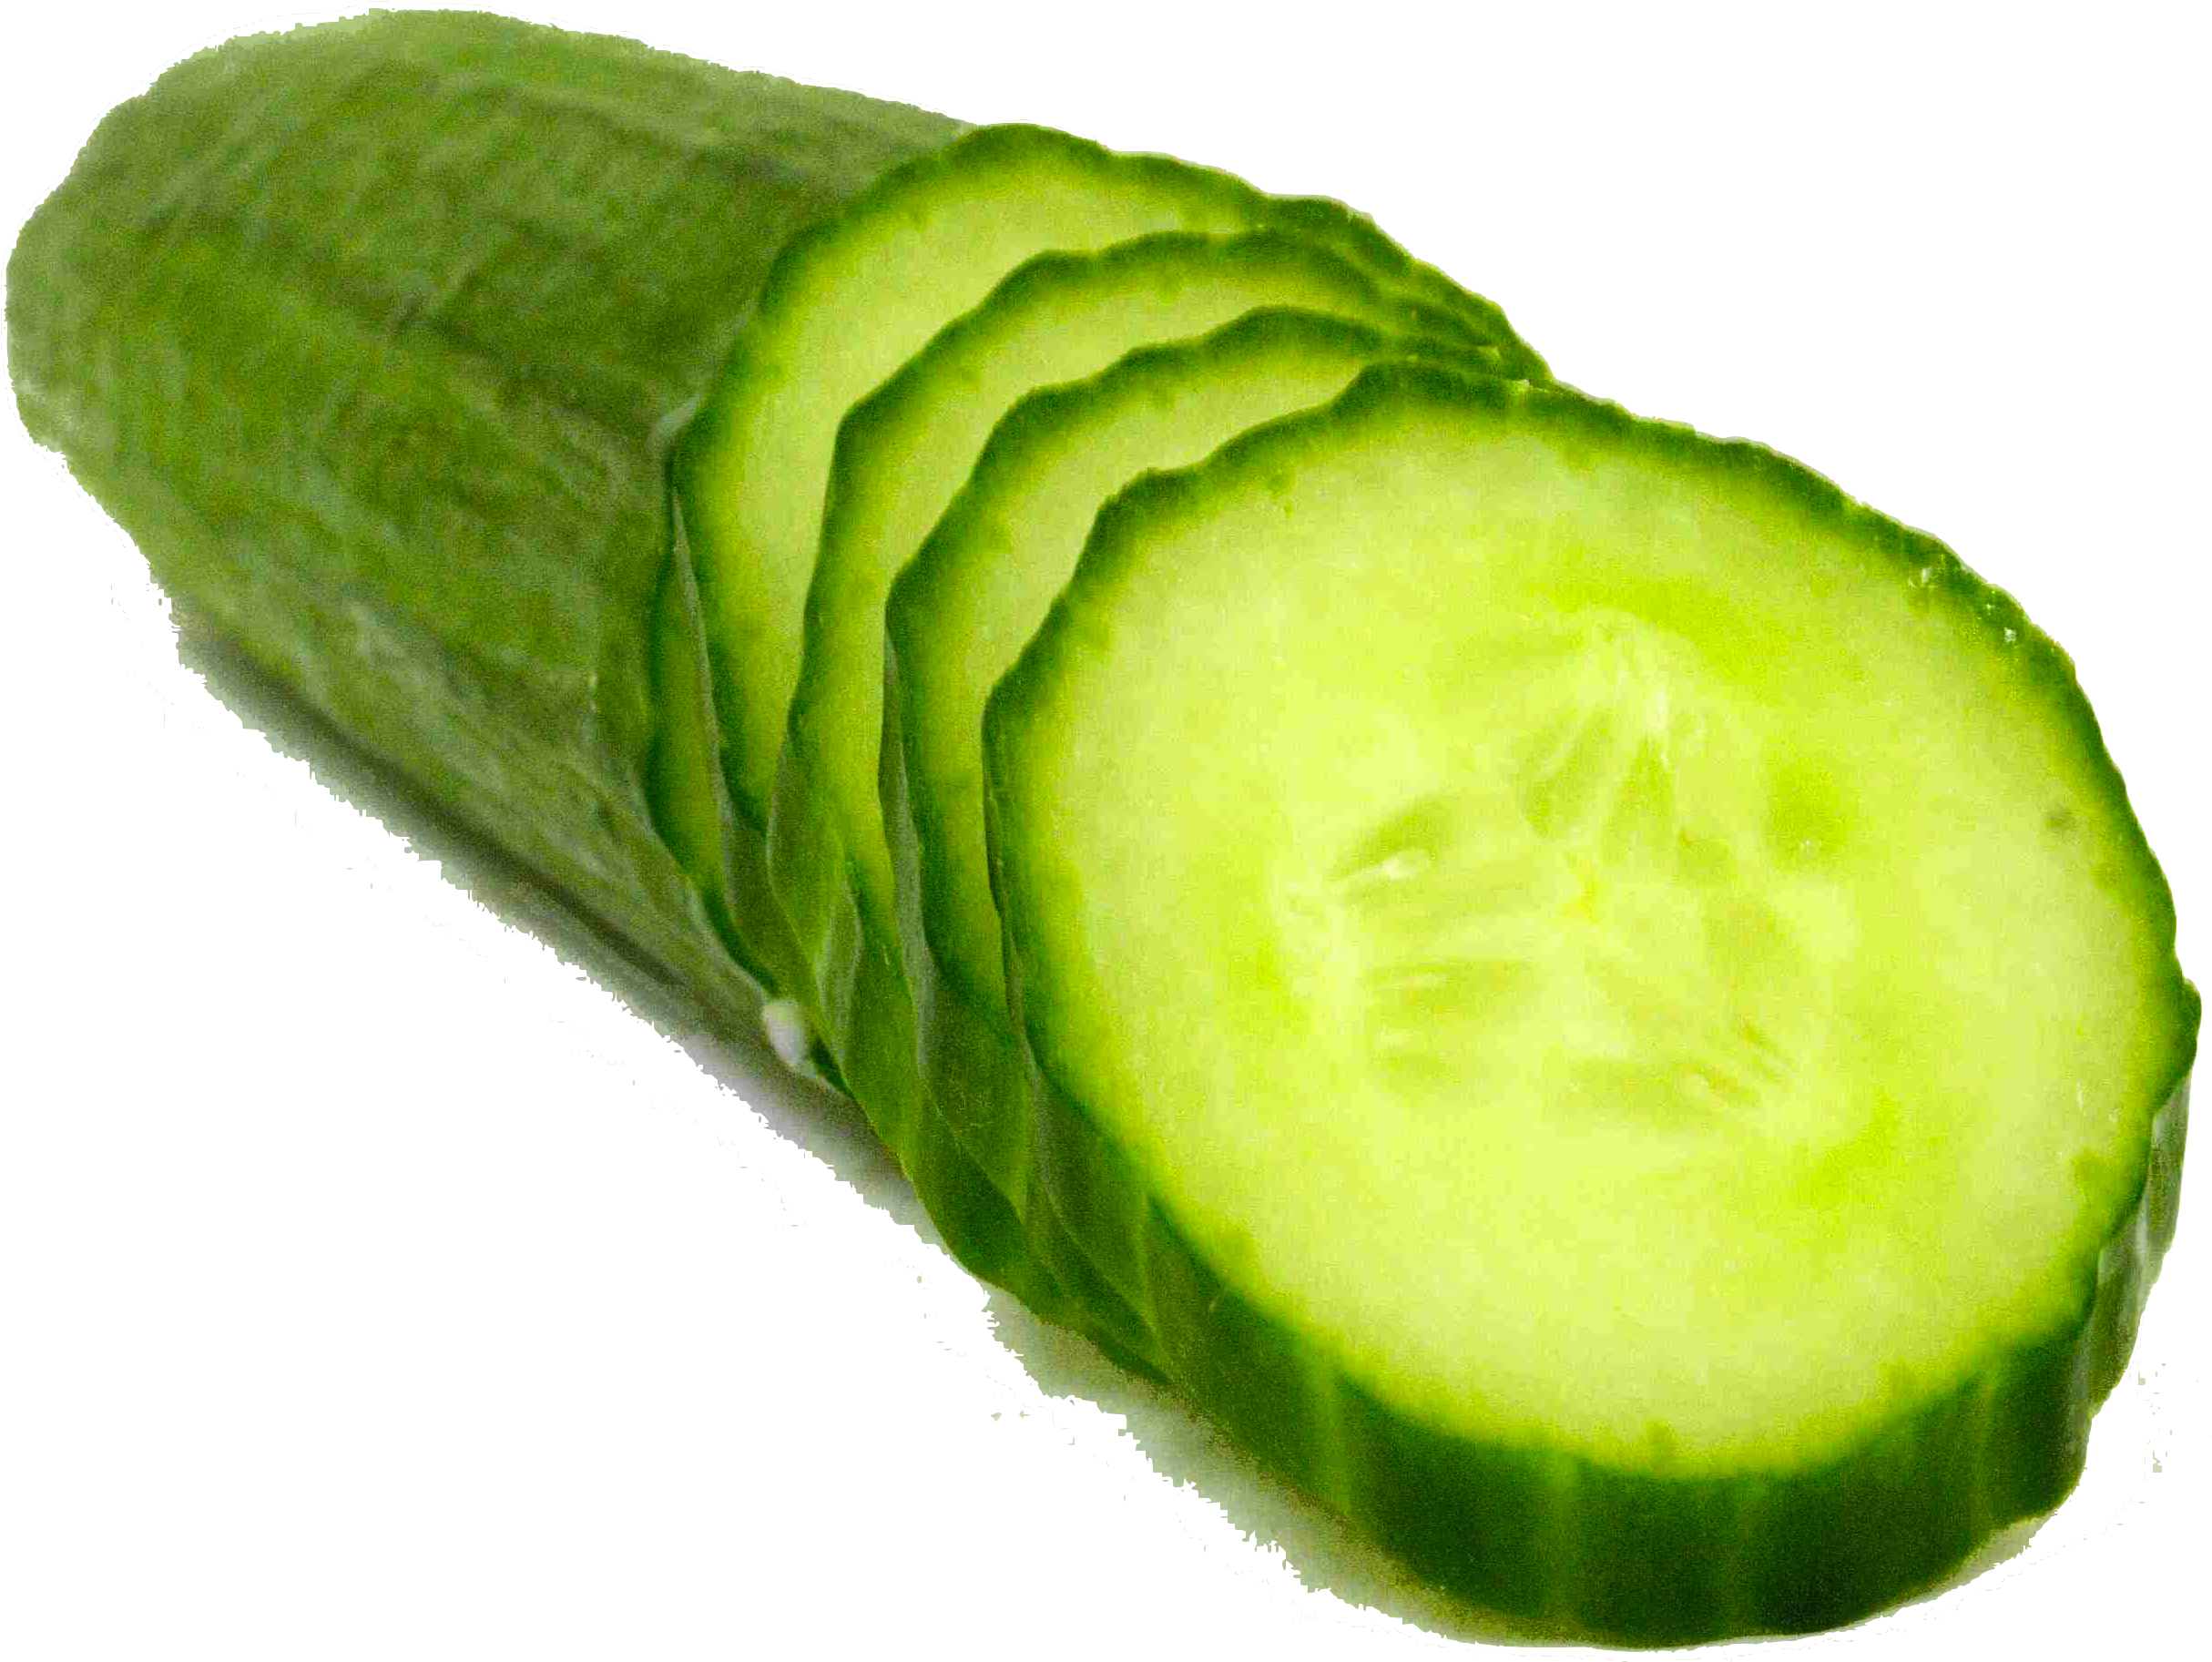 Fresh Cucumber Slices.png PNG